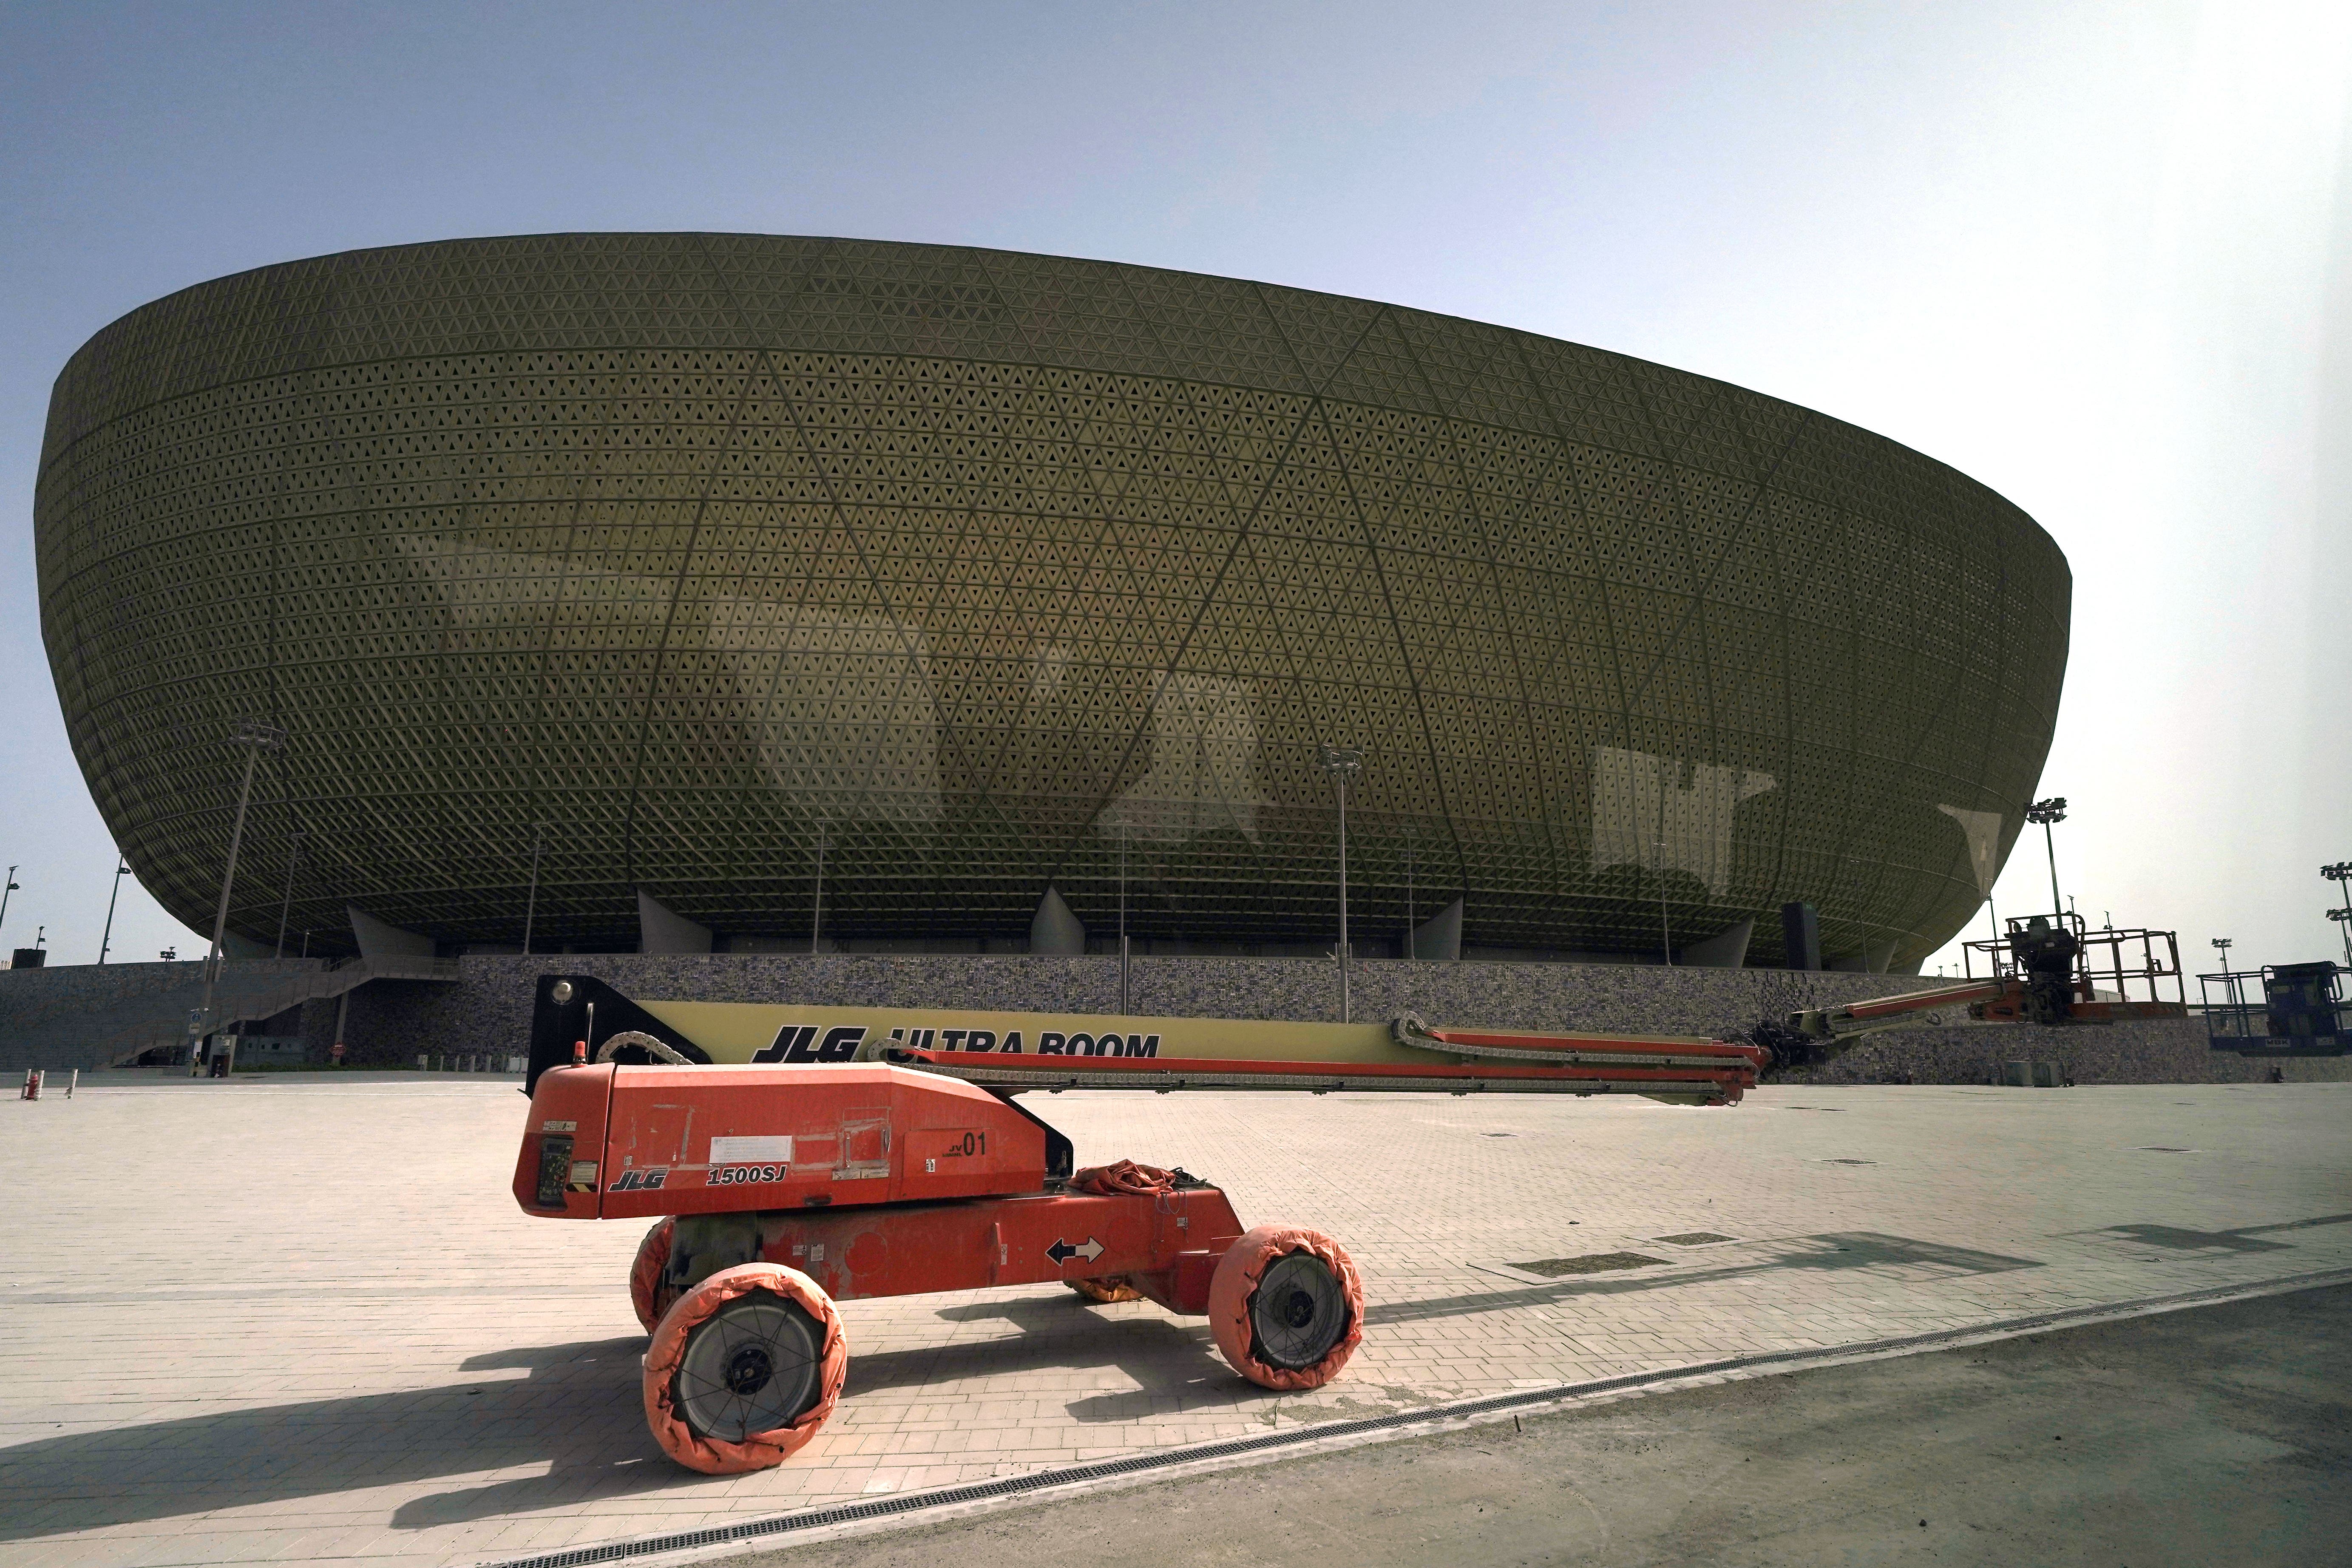 The Lusail Stadium, a venue for the FIFA World Cup Qatar 2022 (PA)